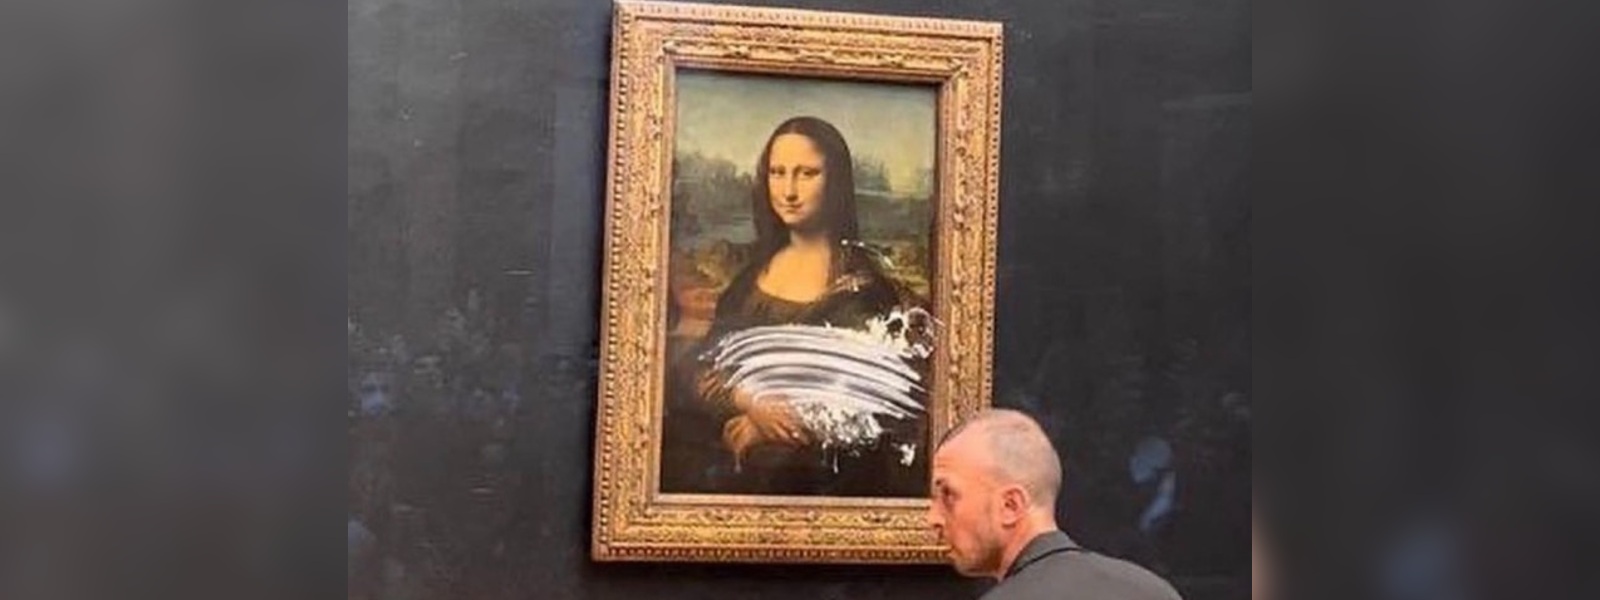 Man arrested after smearing Mona Lisa with cake